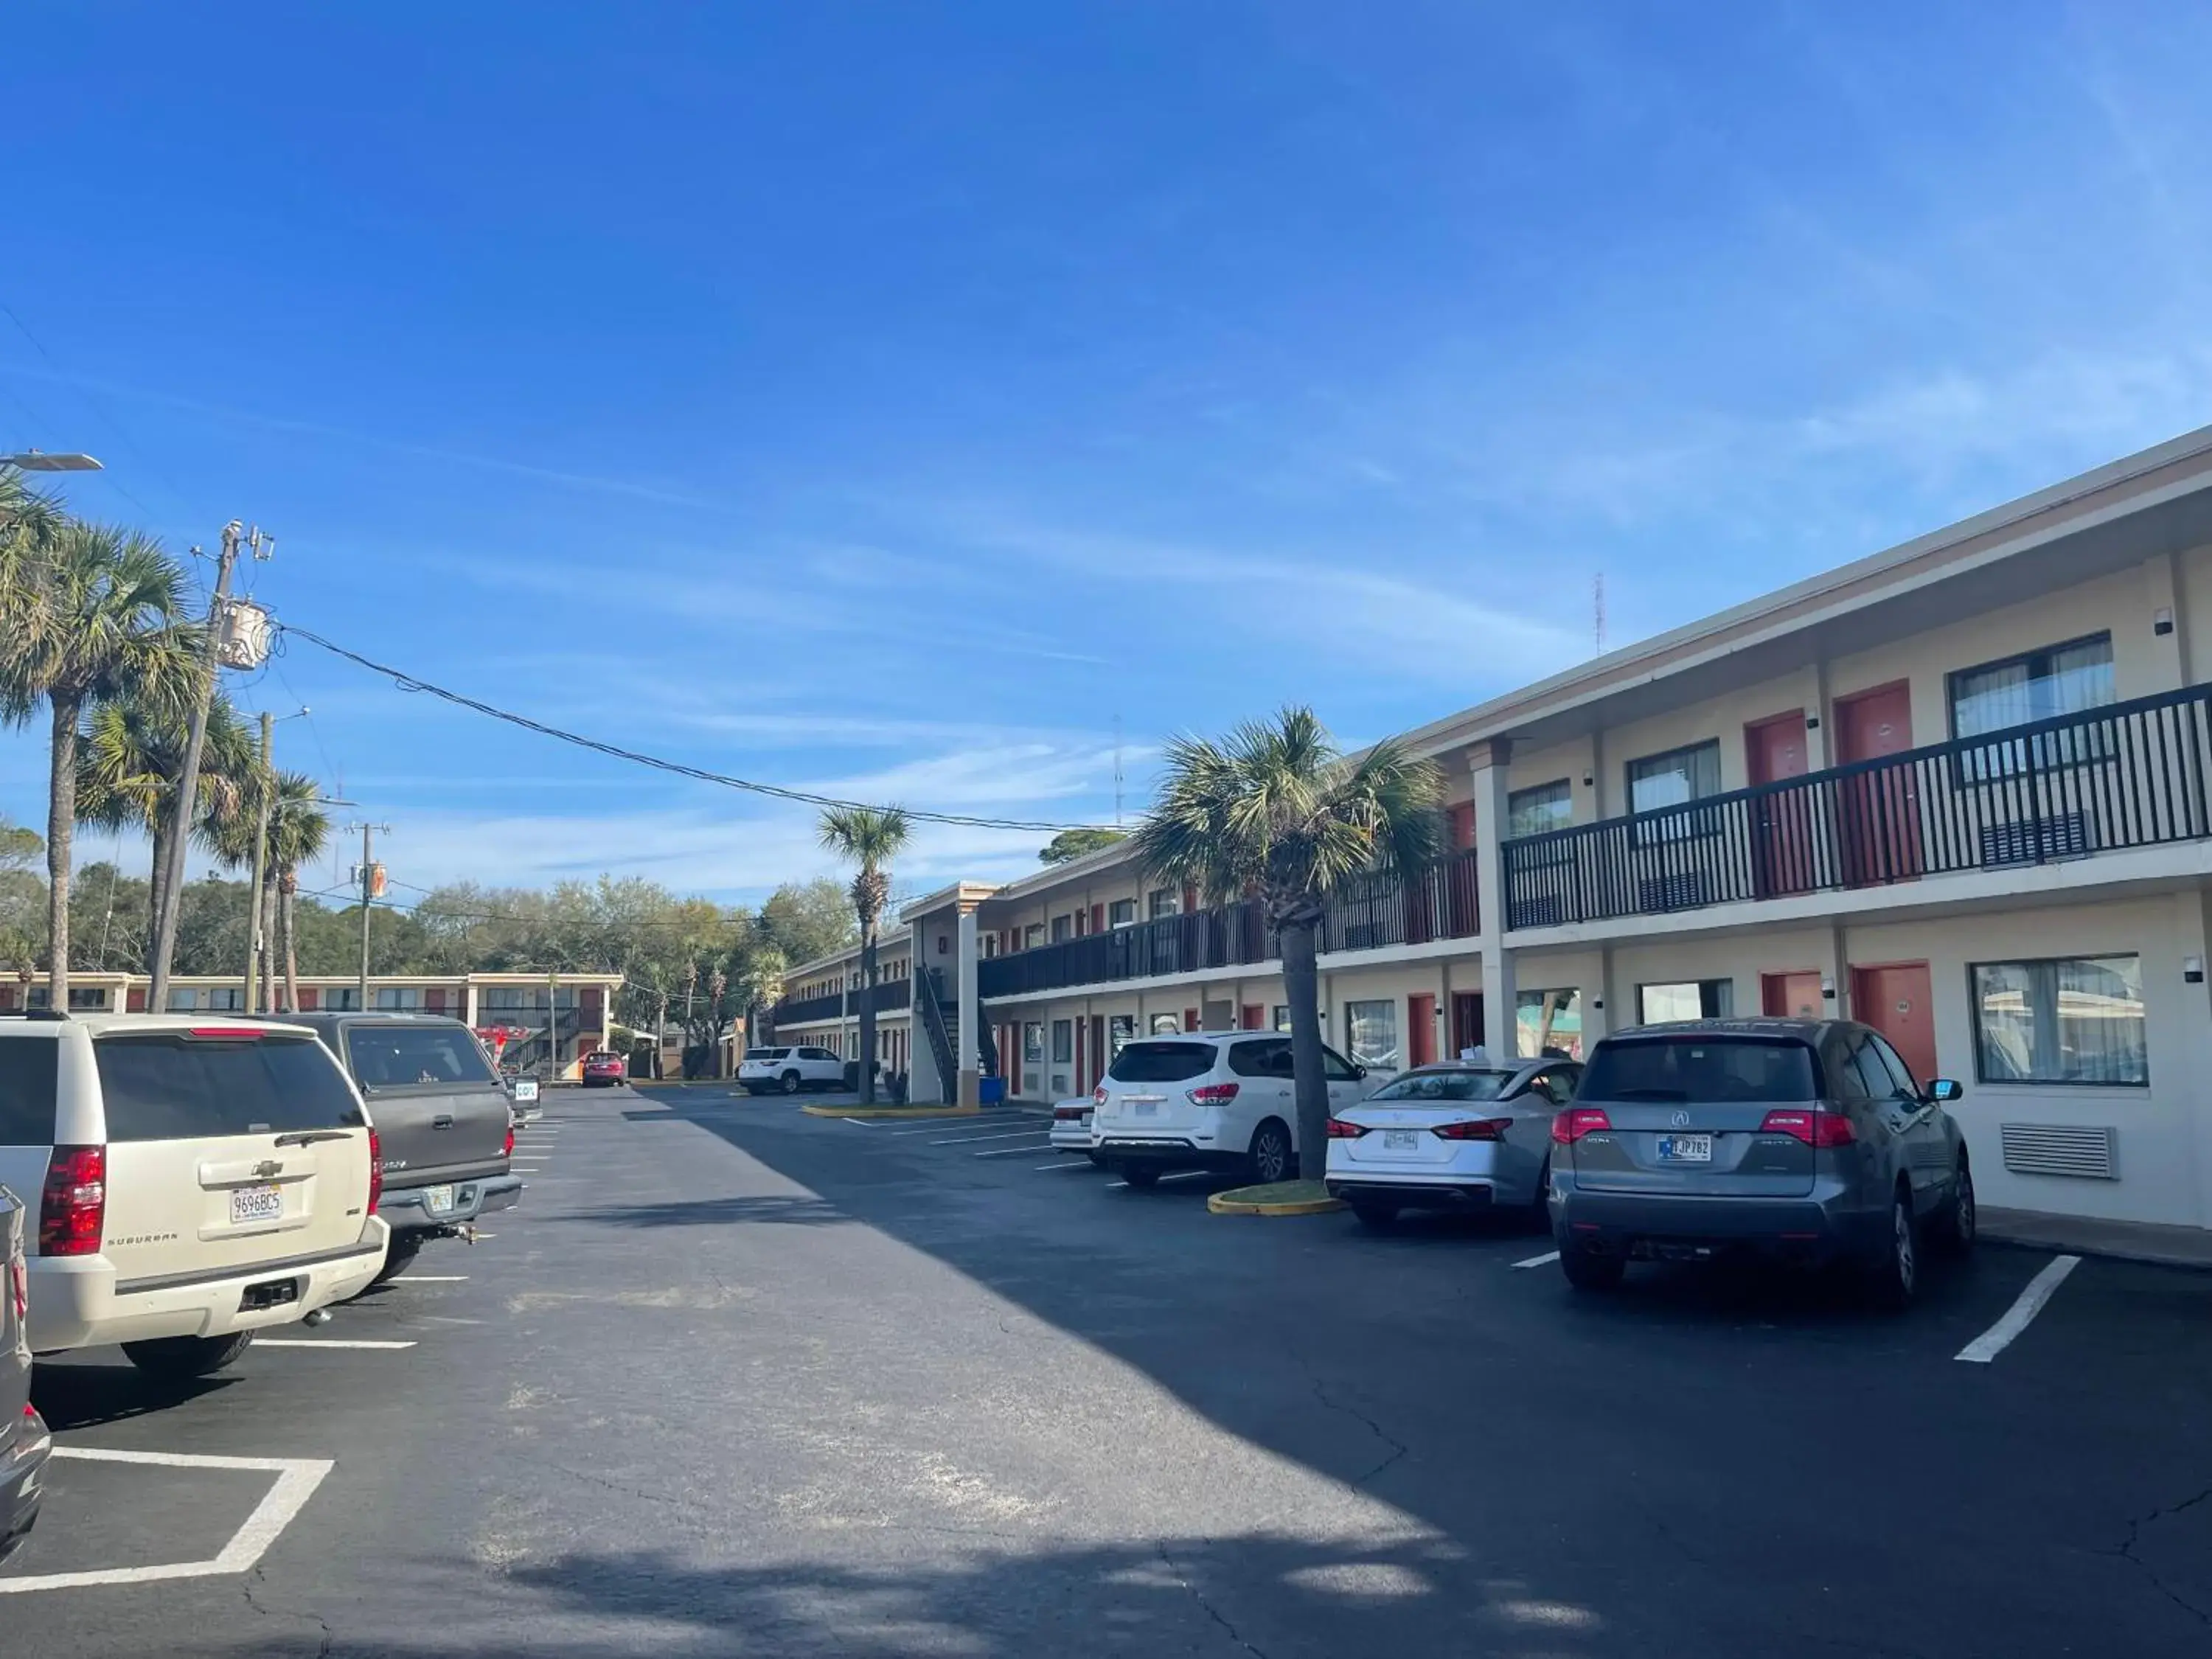 Property building in Hole Inn the Wall Hotel - Sunset Plaza - Fort Walton Beach